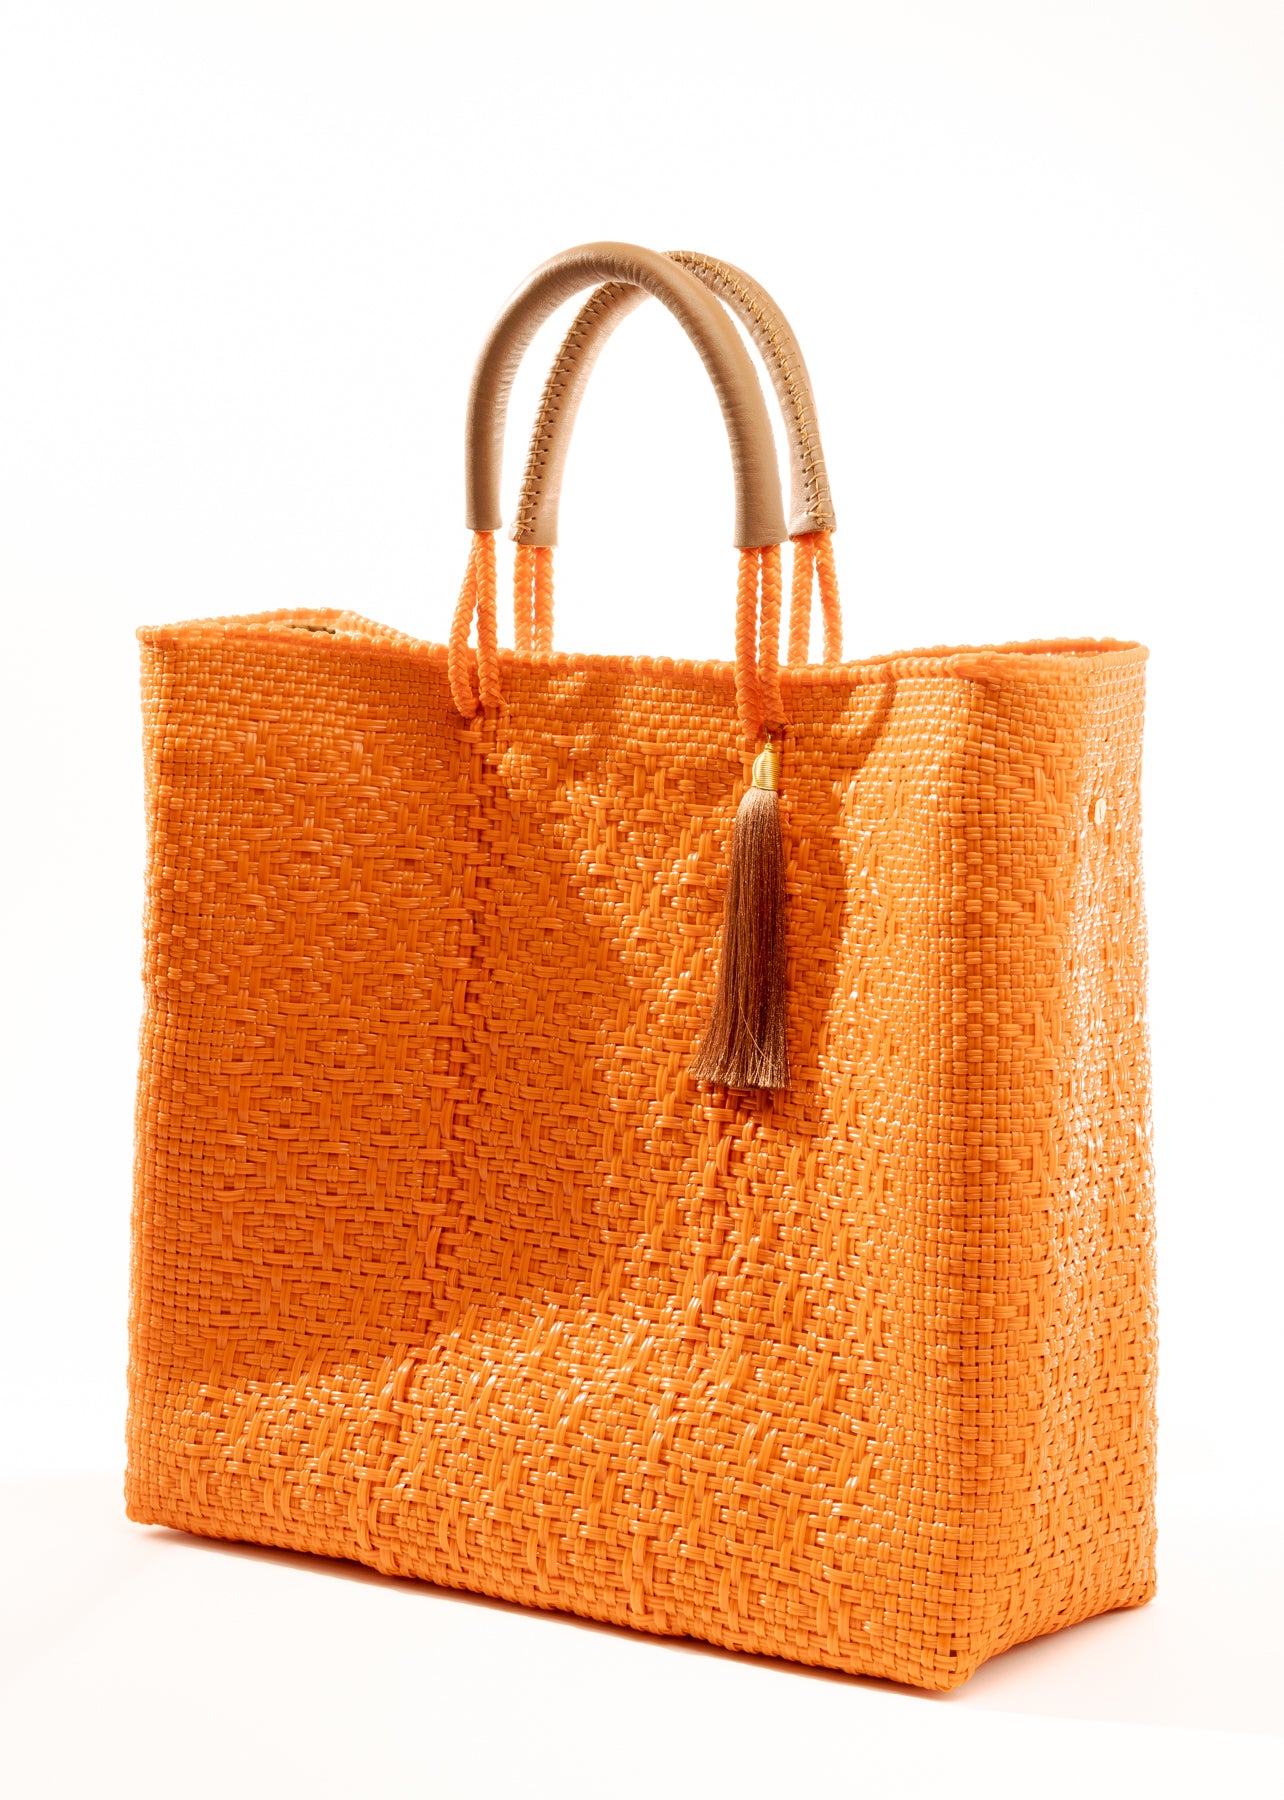 Side angle of orange woven tote bag made from recycled plastics with tan handles and tan tassel detail